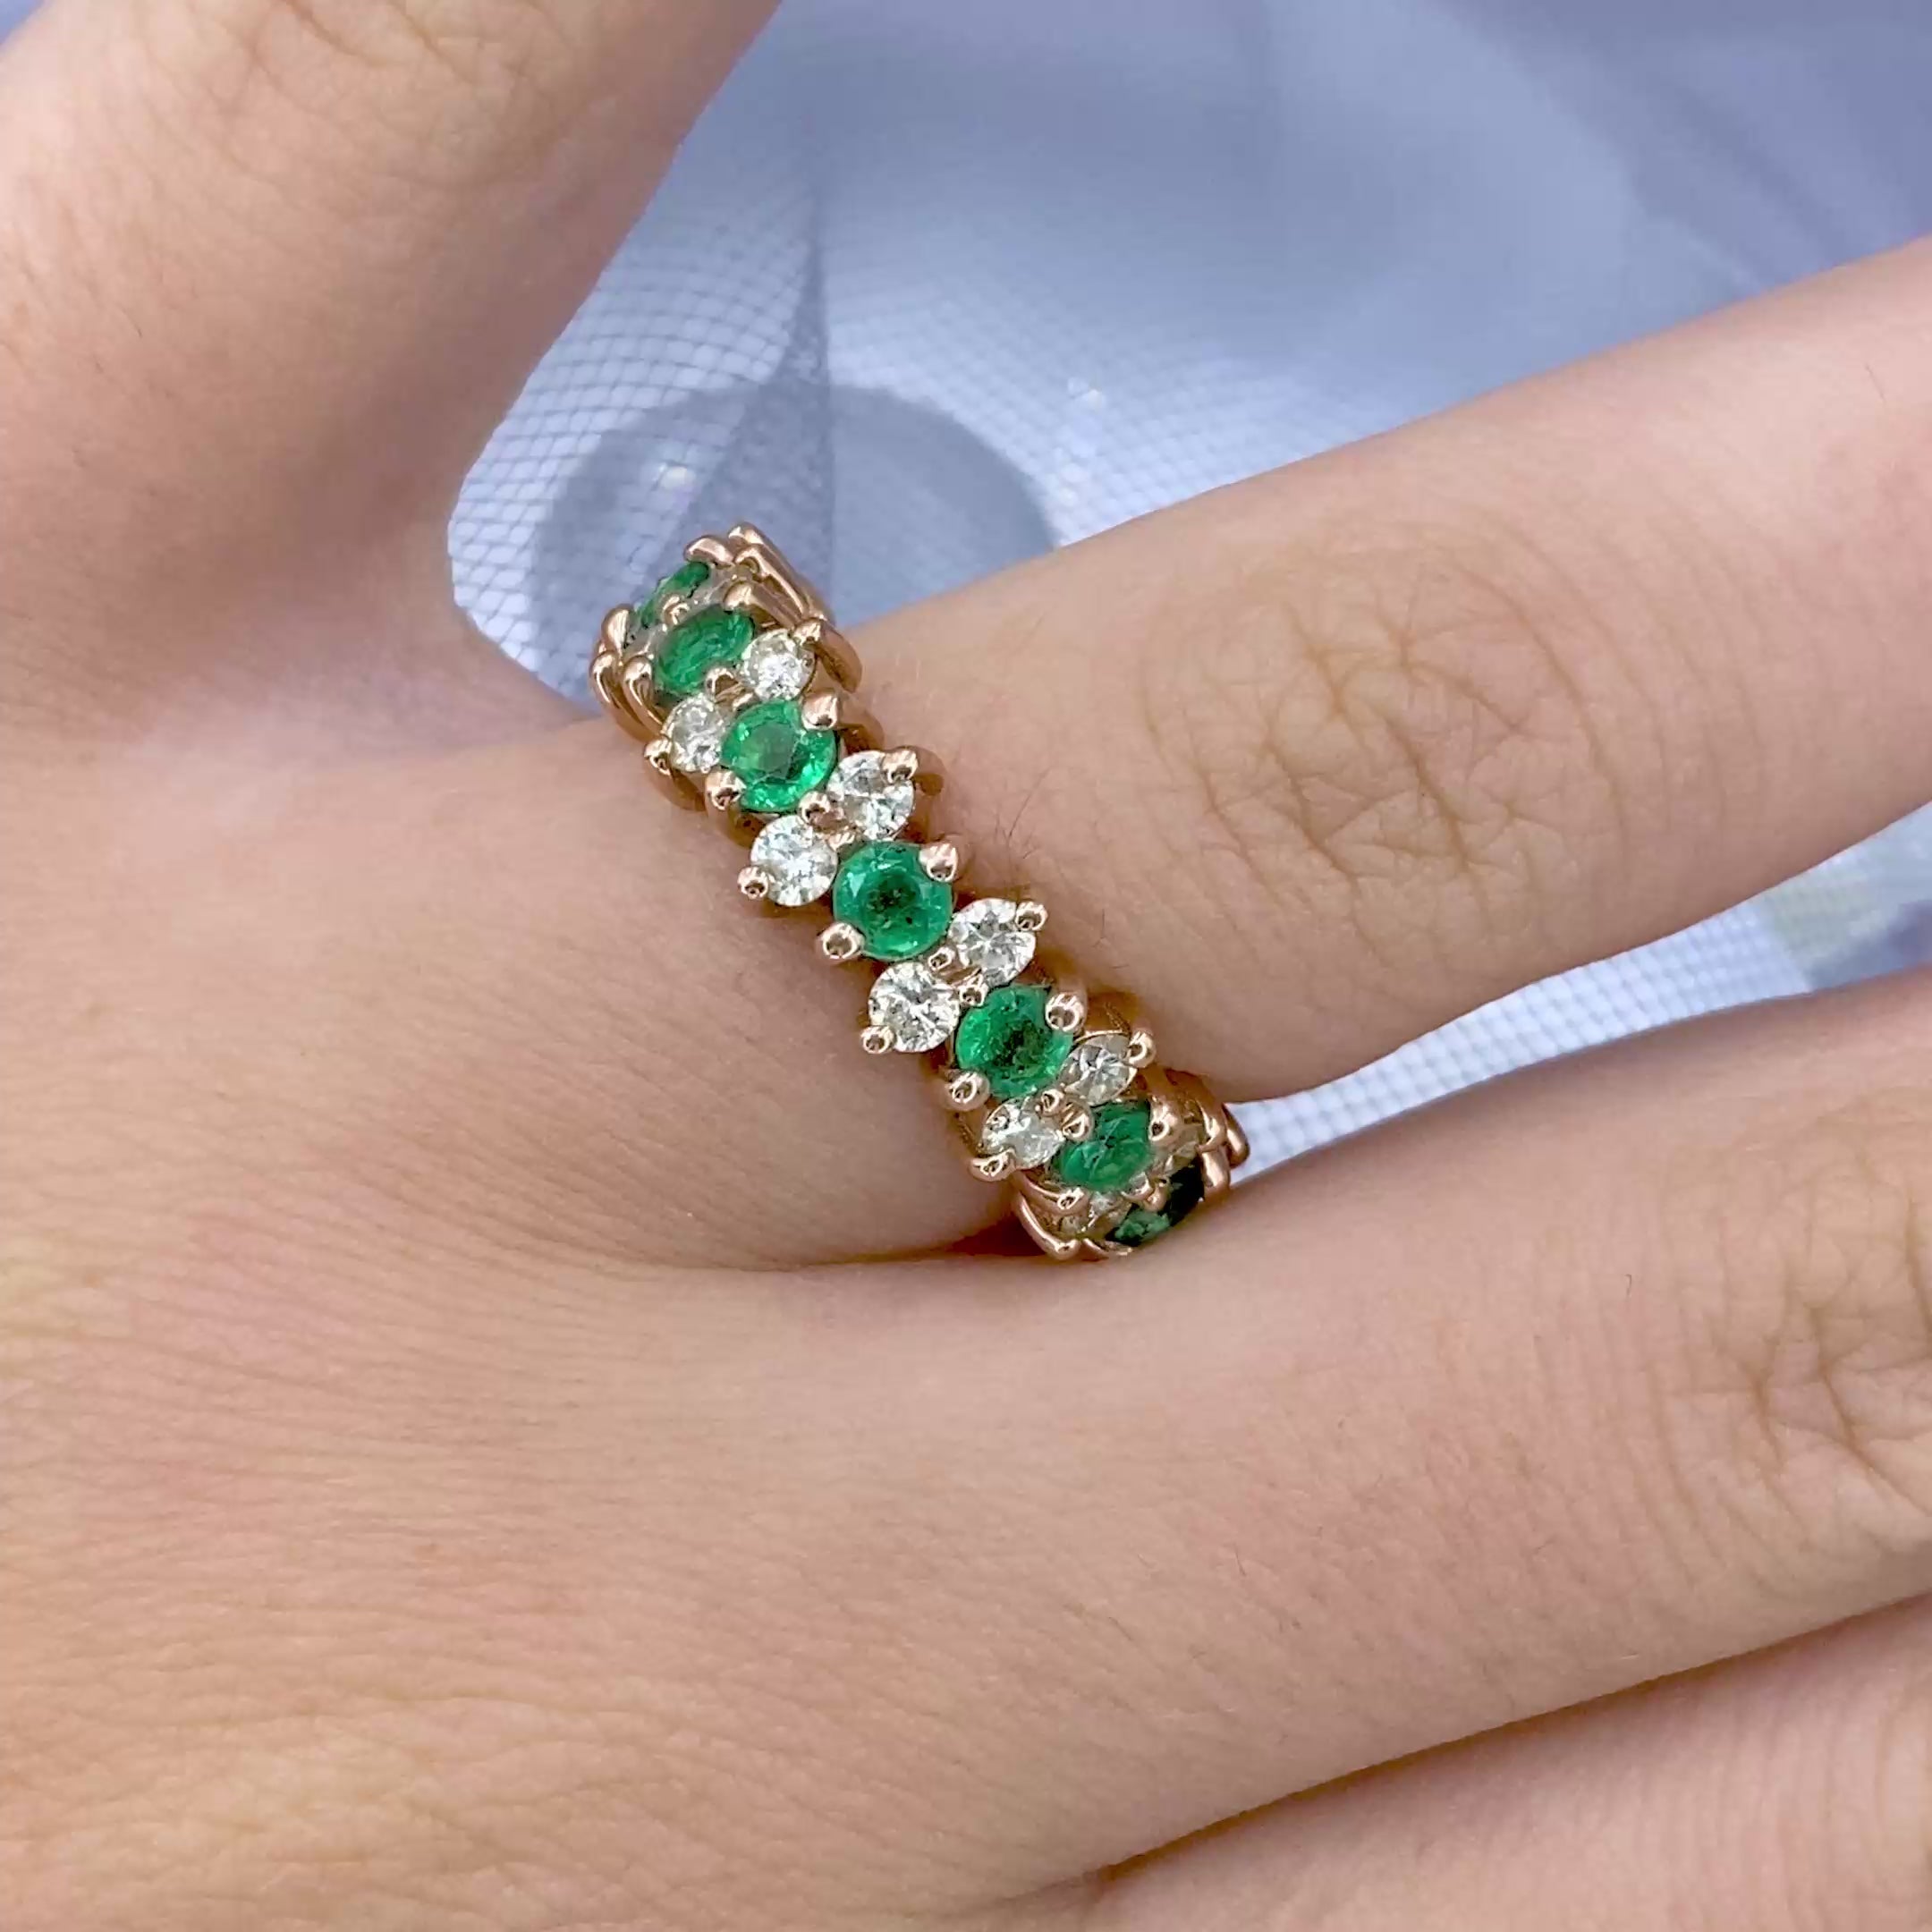 Prestige 4.00 CT Round Cut Diamond and Green Emerald Eternity Ring in 14KT Rose Gold